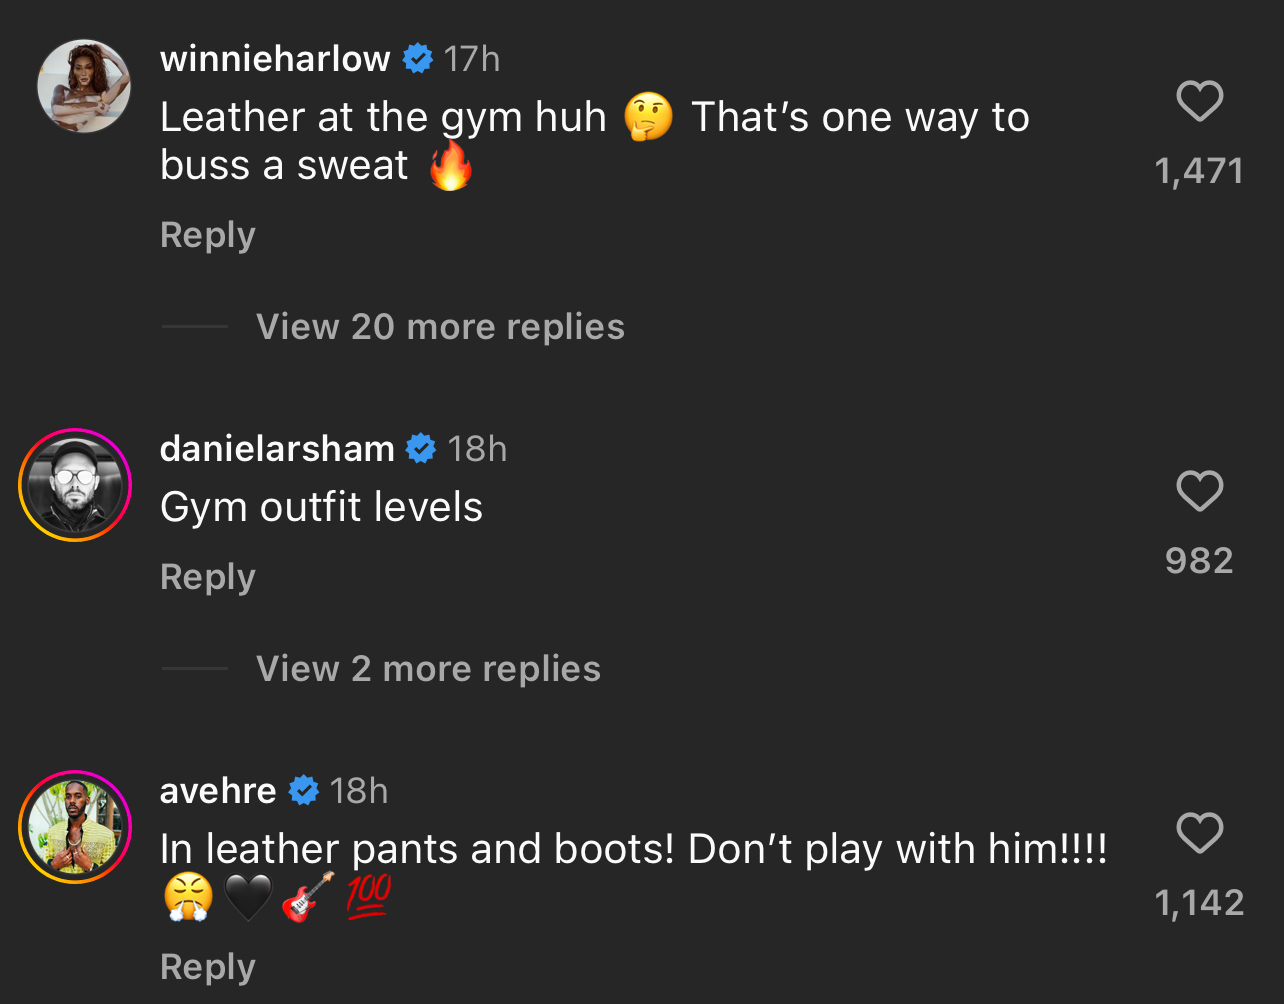 Comments on a social media post engaging with humor about someone wearing leather to the gym, with emoji reactions